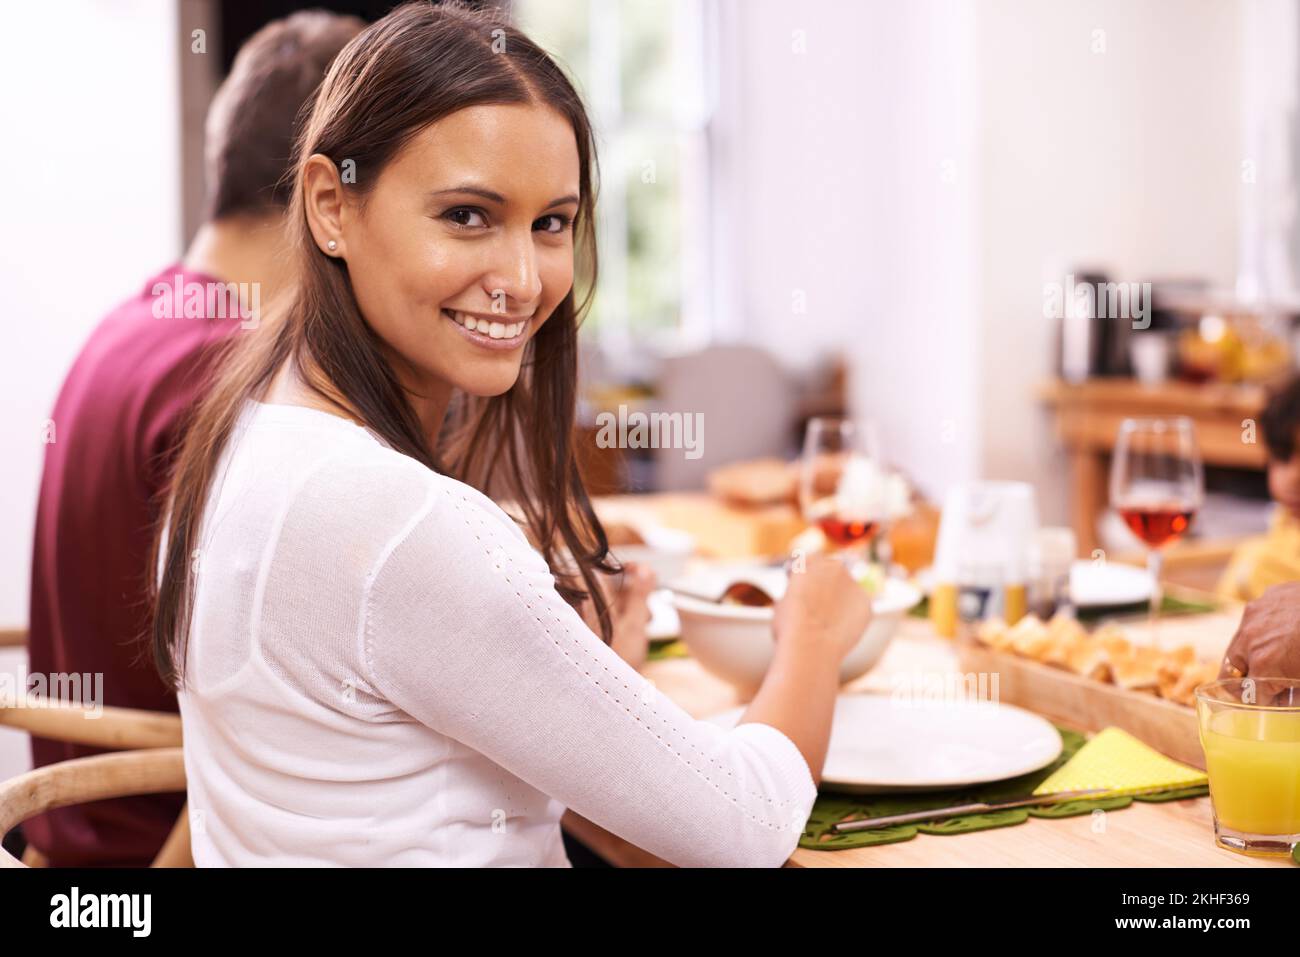 Good food equals good life. A happy couple enjoying a family meal around the table. Stock Photo